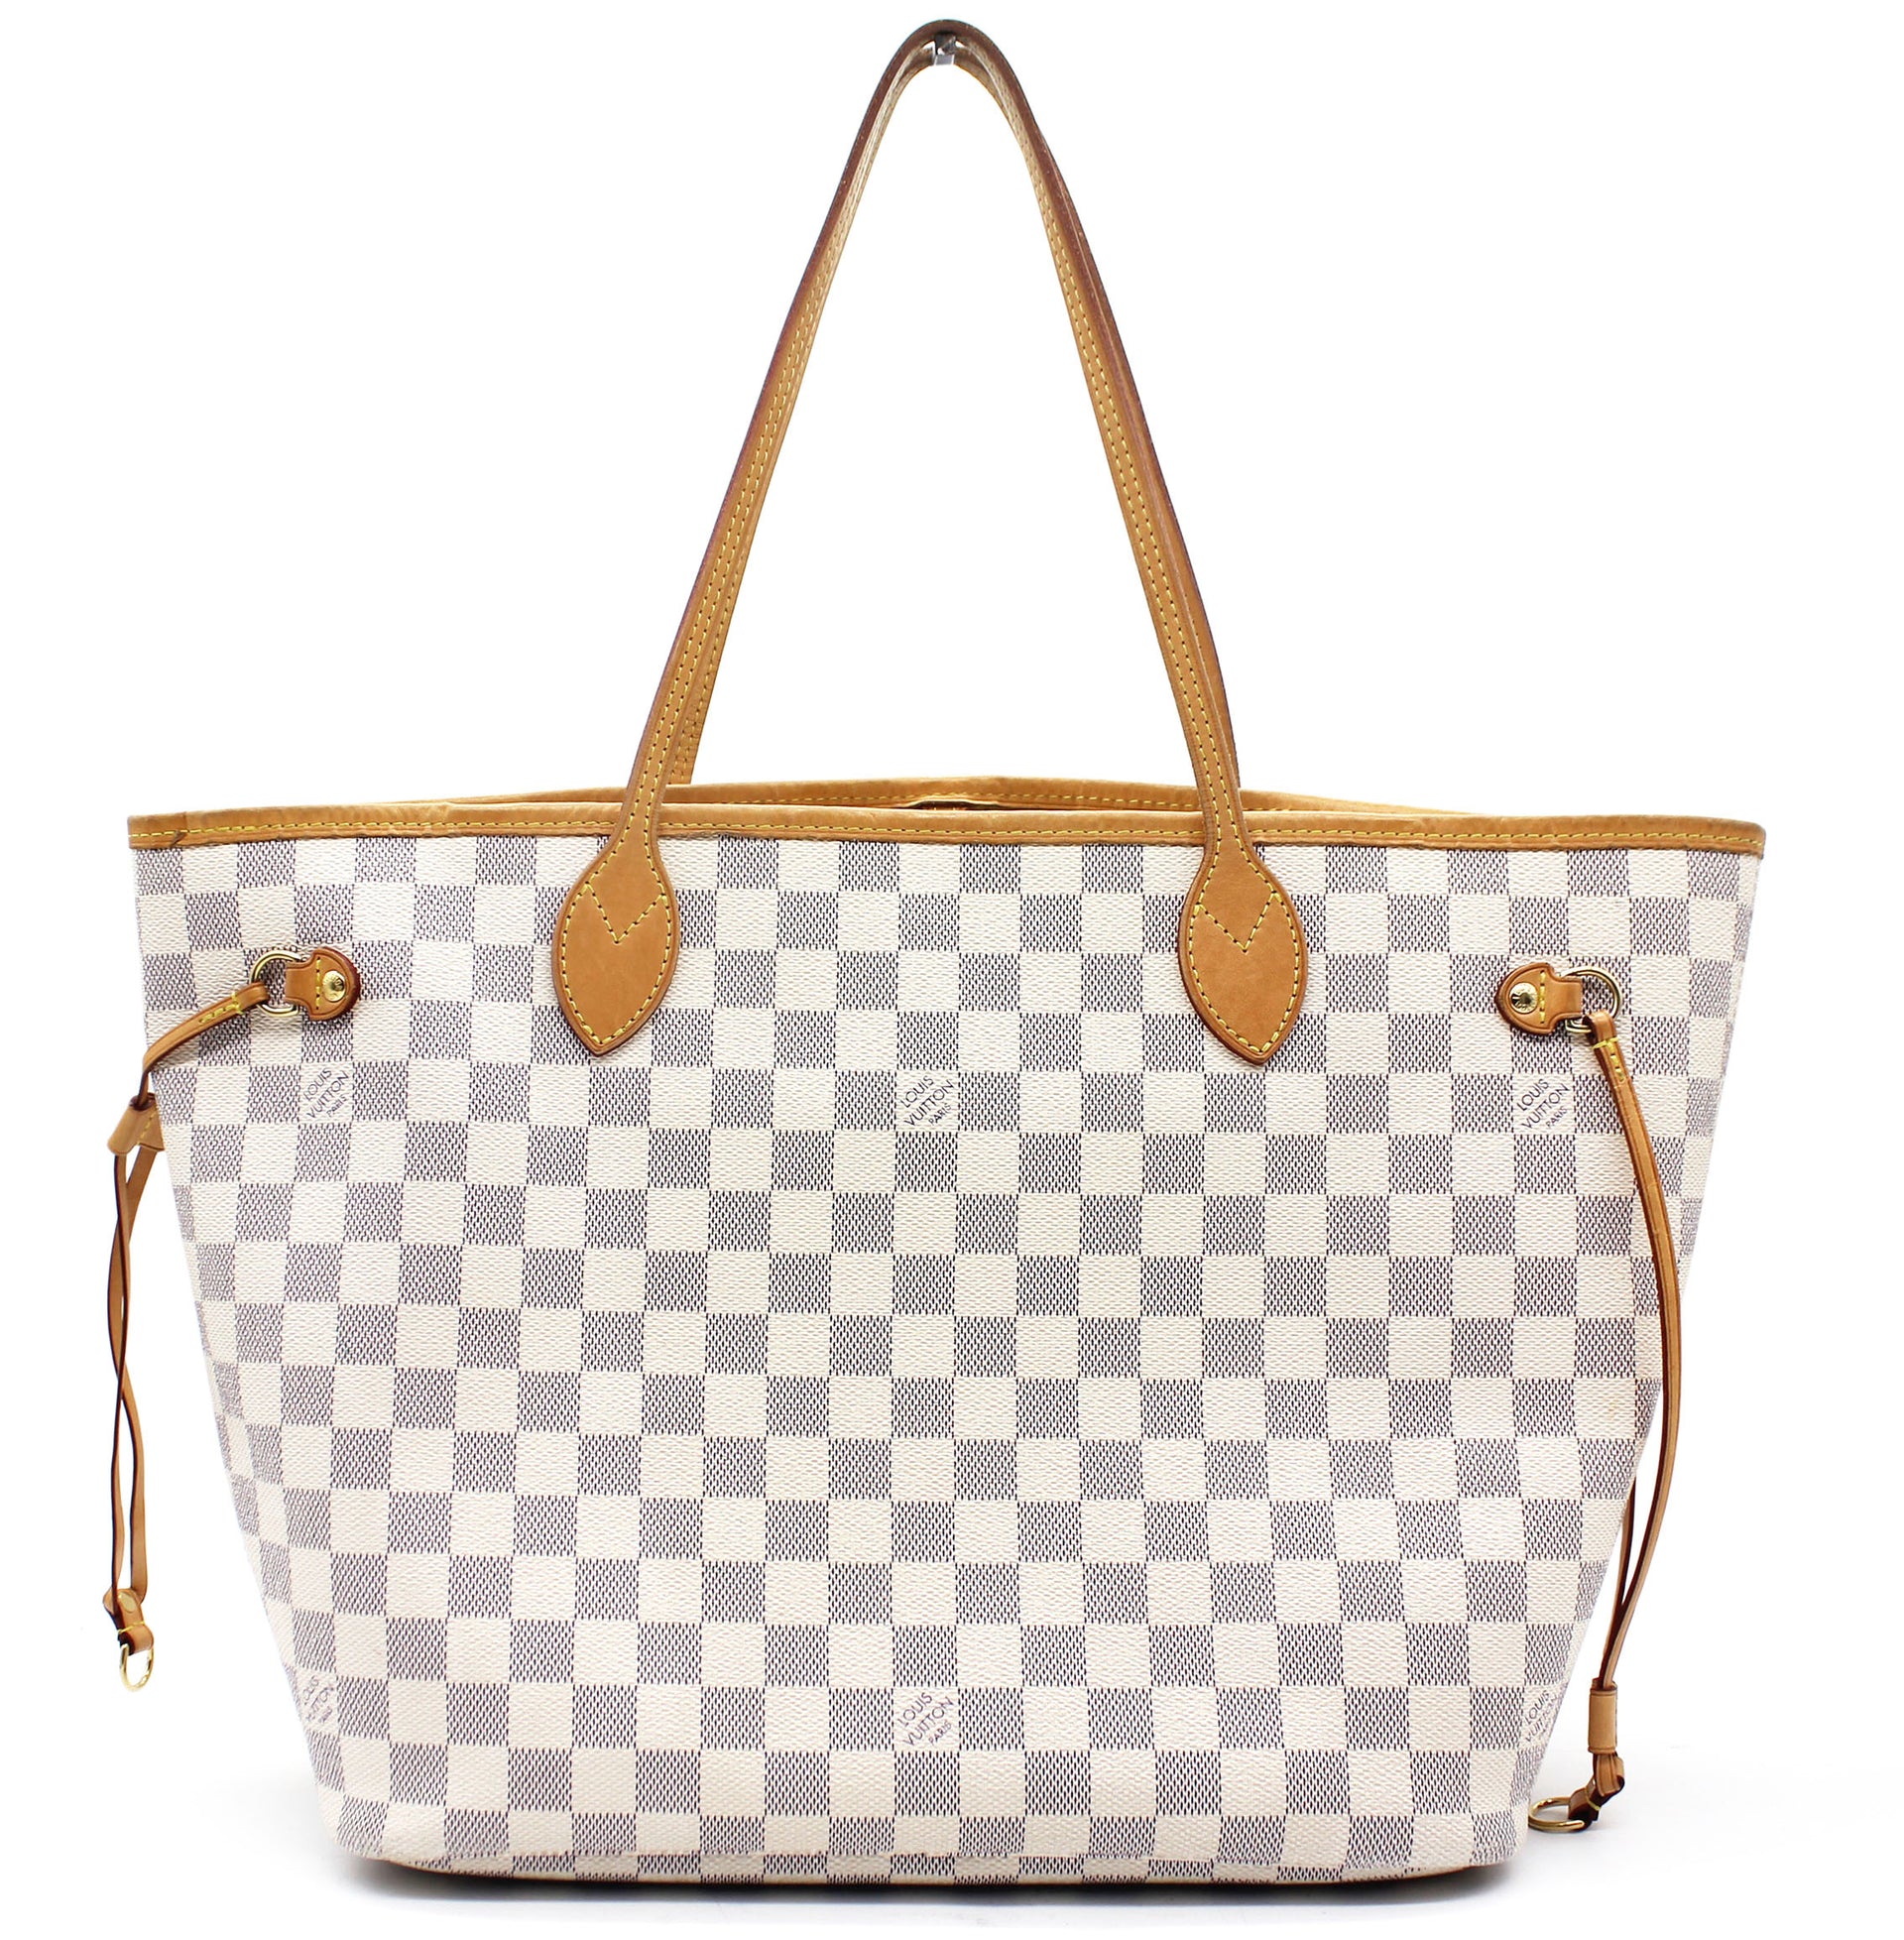 Lot - Louis Vuitton Neverfull MM Tote Bag, in Damier Azur coated canvas